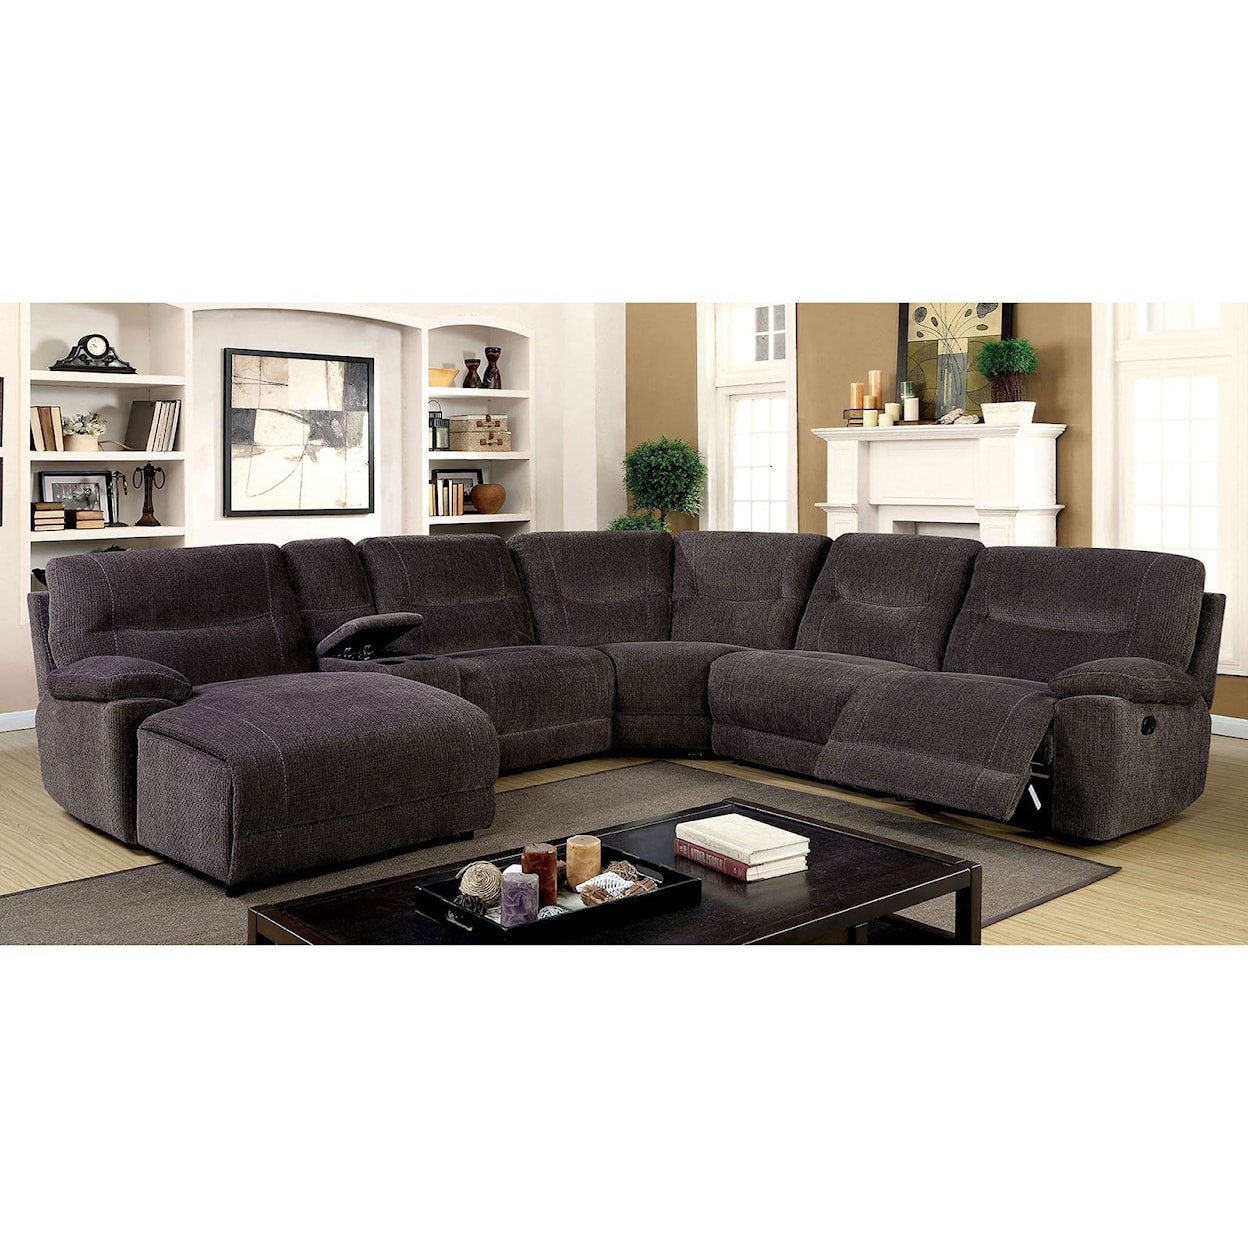 FUSA Karlee II Sectional with Console